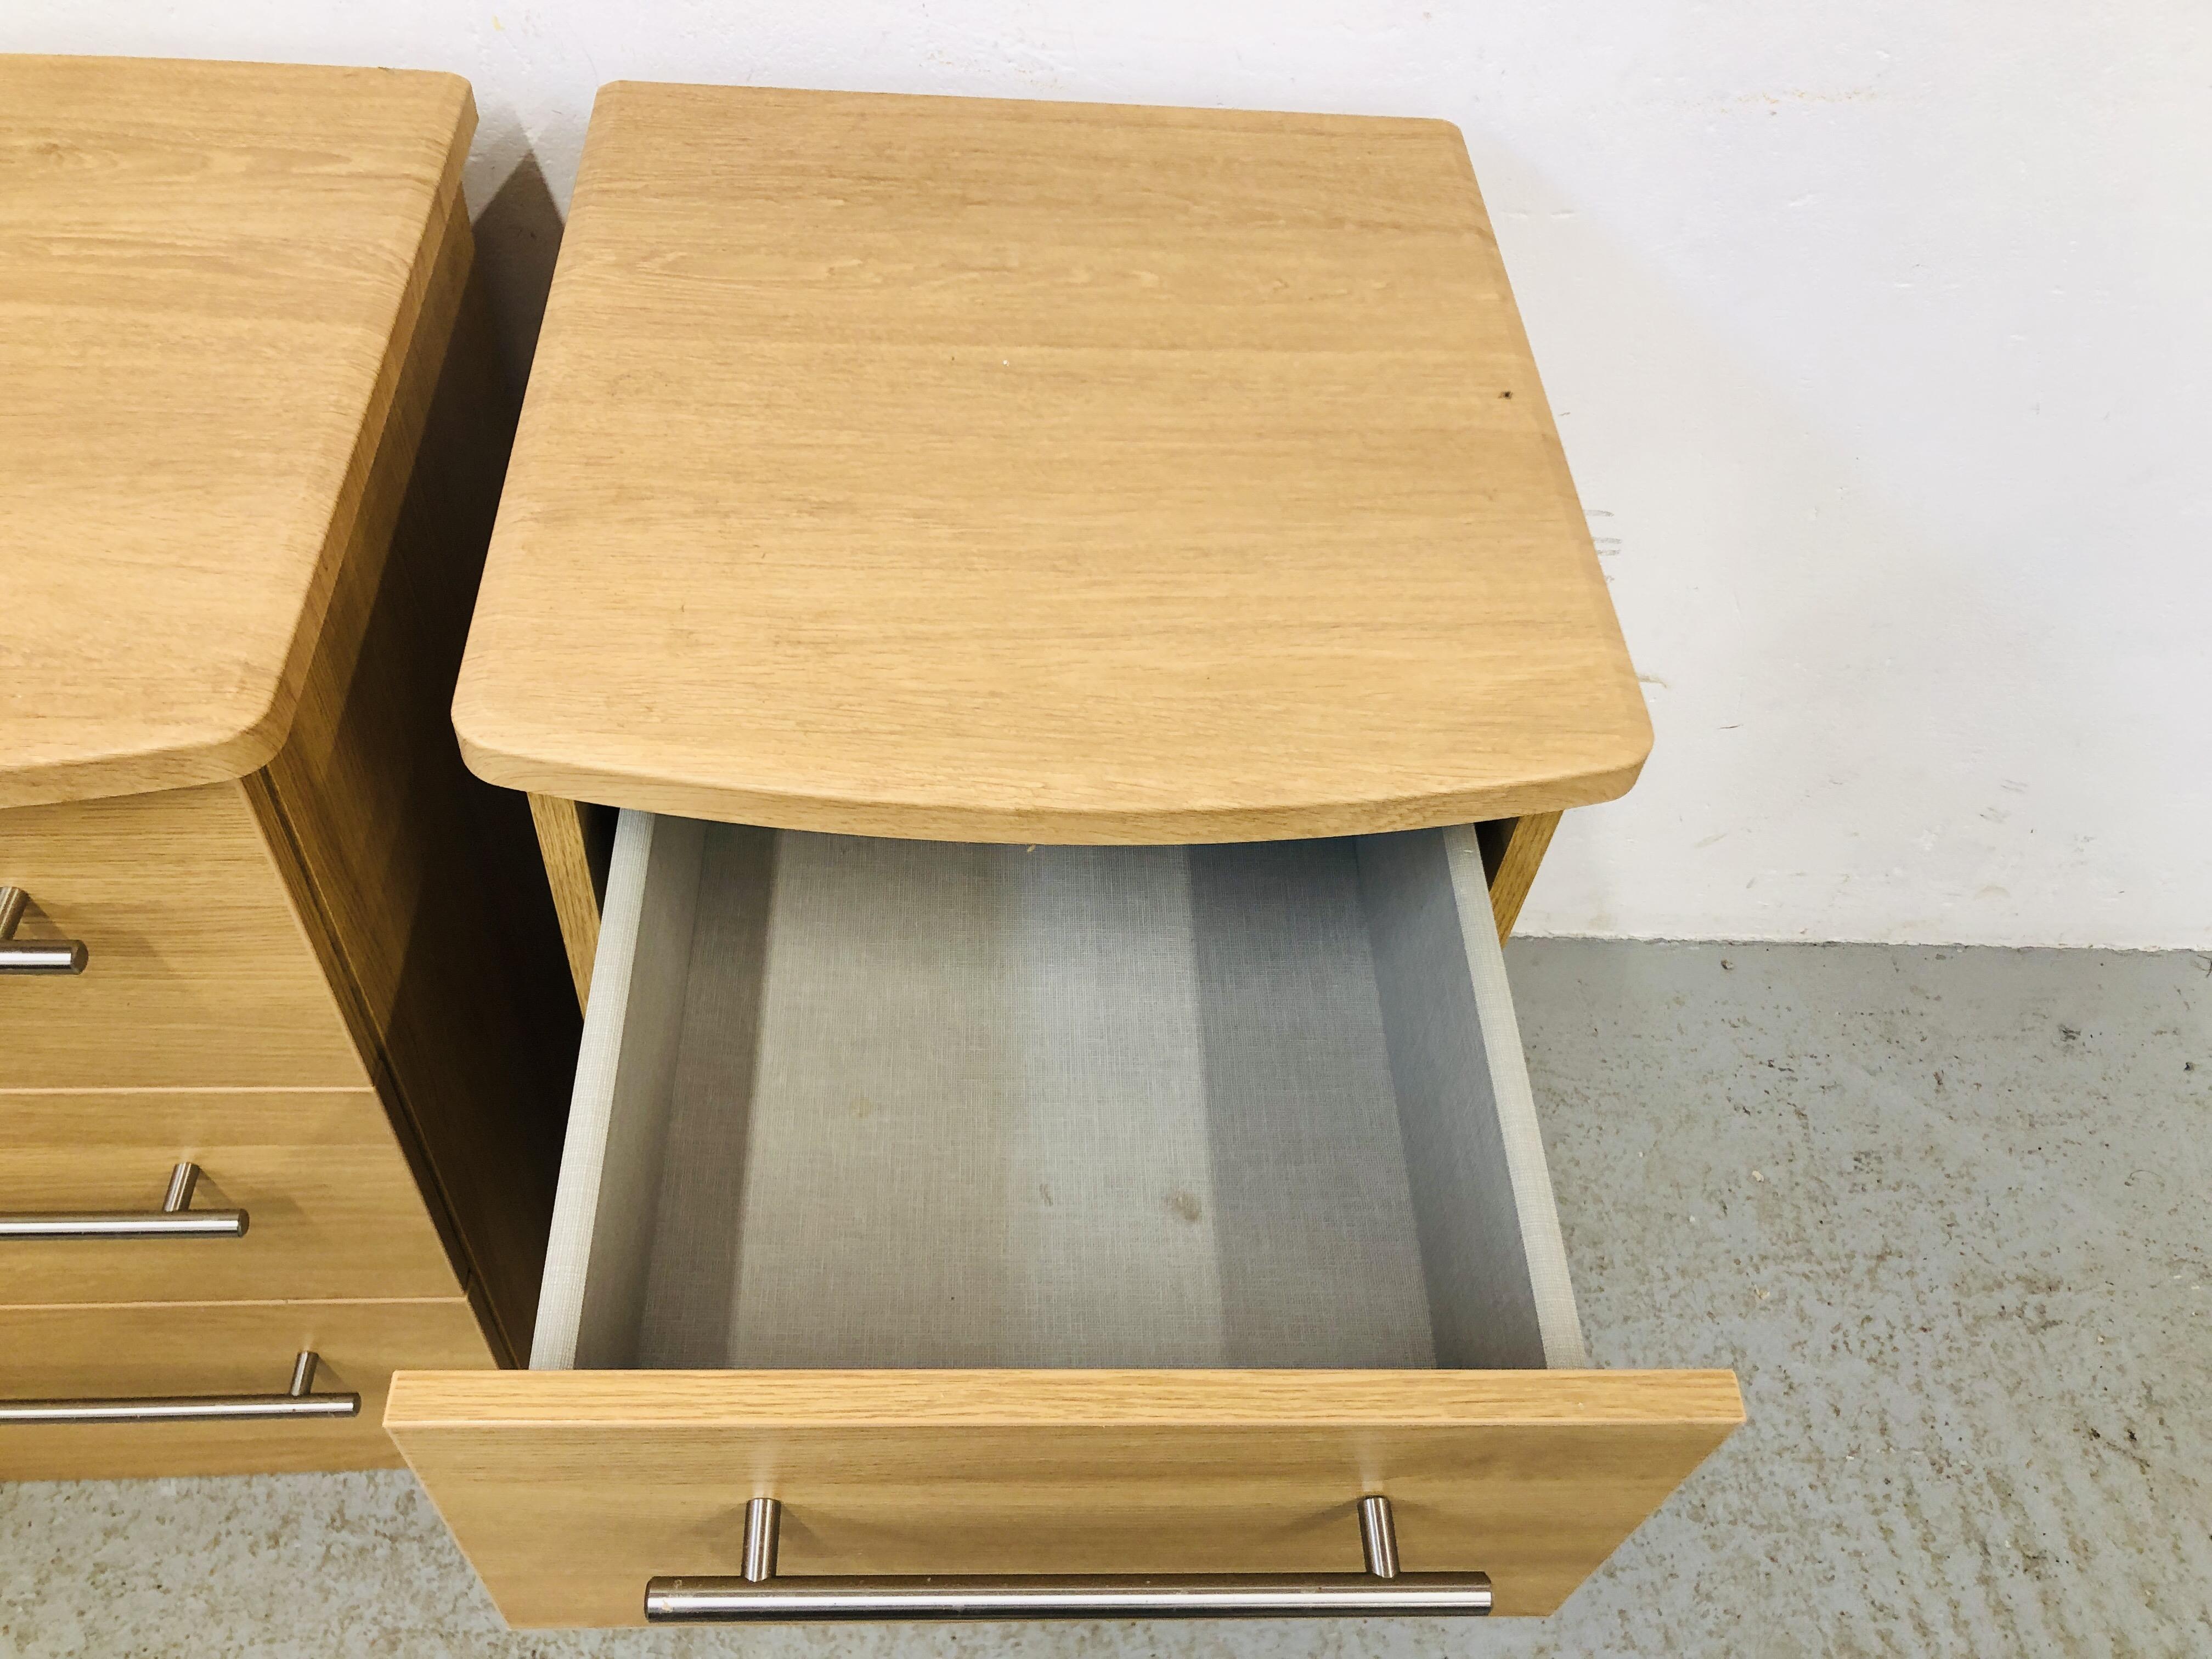 PAIR OF MODERN LIGHT OAK FINISH THREE DRAWER BEDSIDE CHESTS - Image 2 of 6